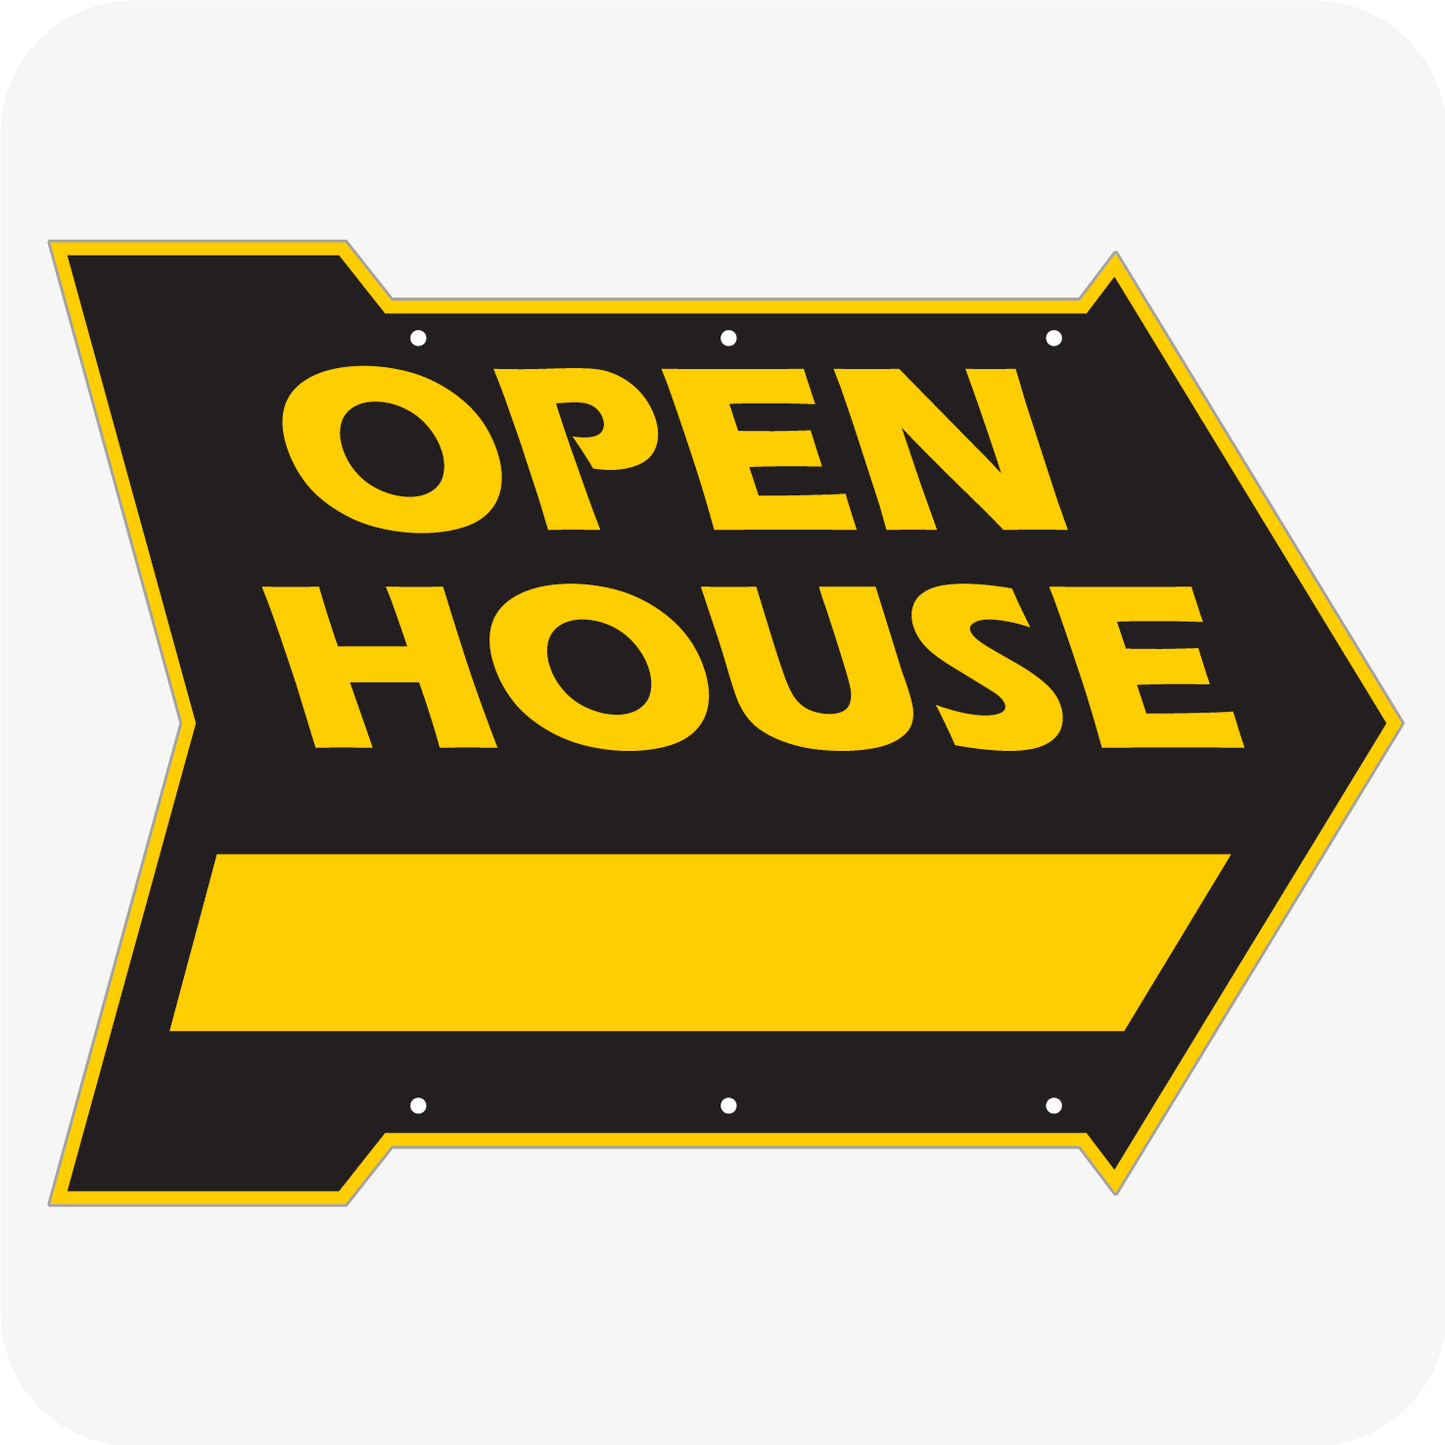 Open House 18 x 24 Arrow w/ Blank - Black and Yellow